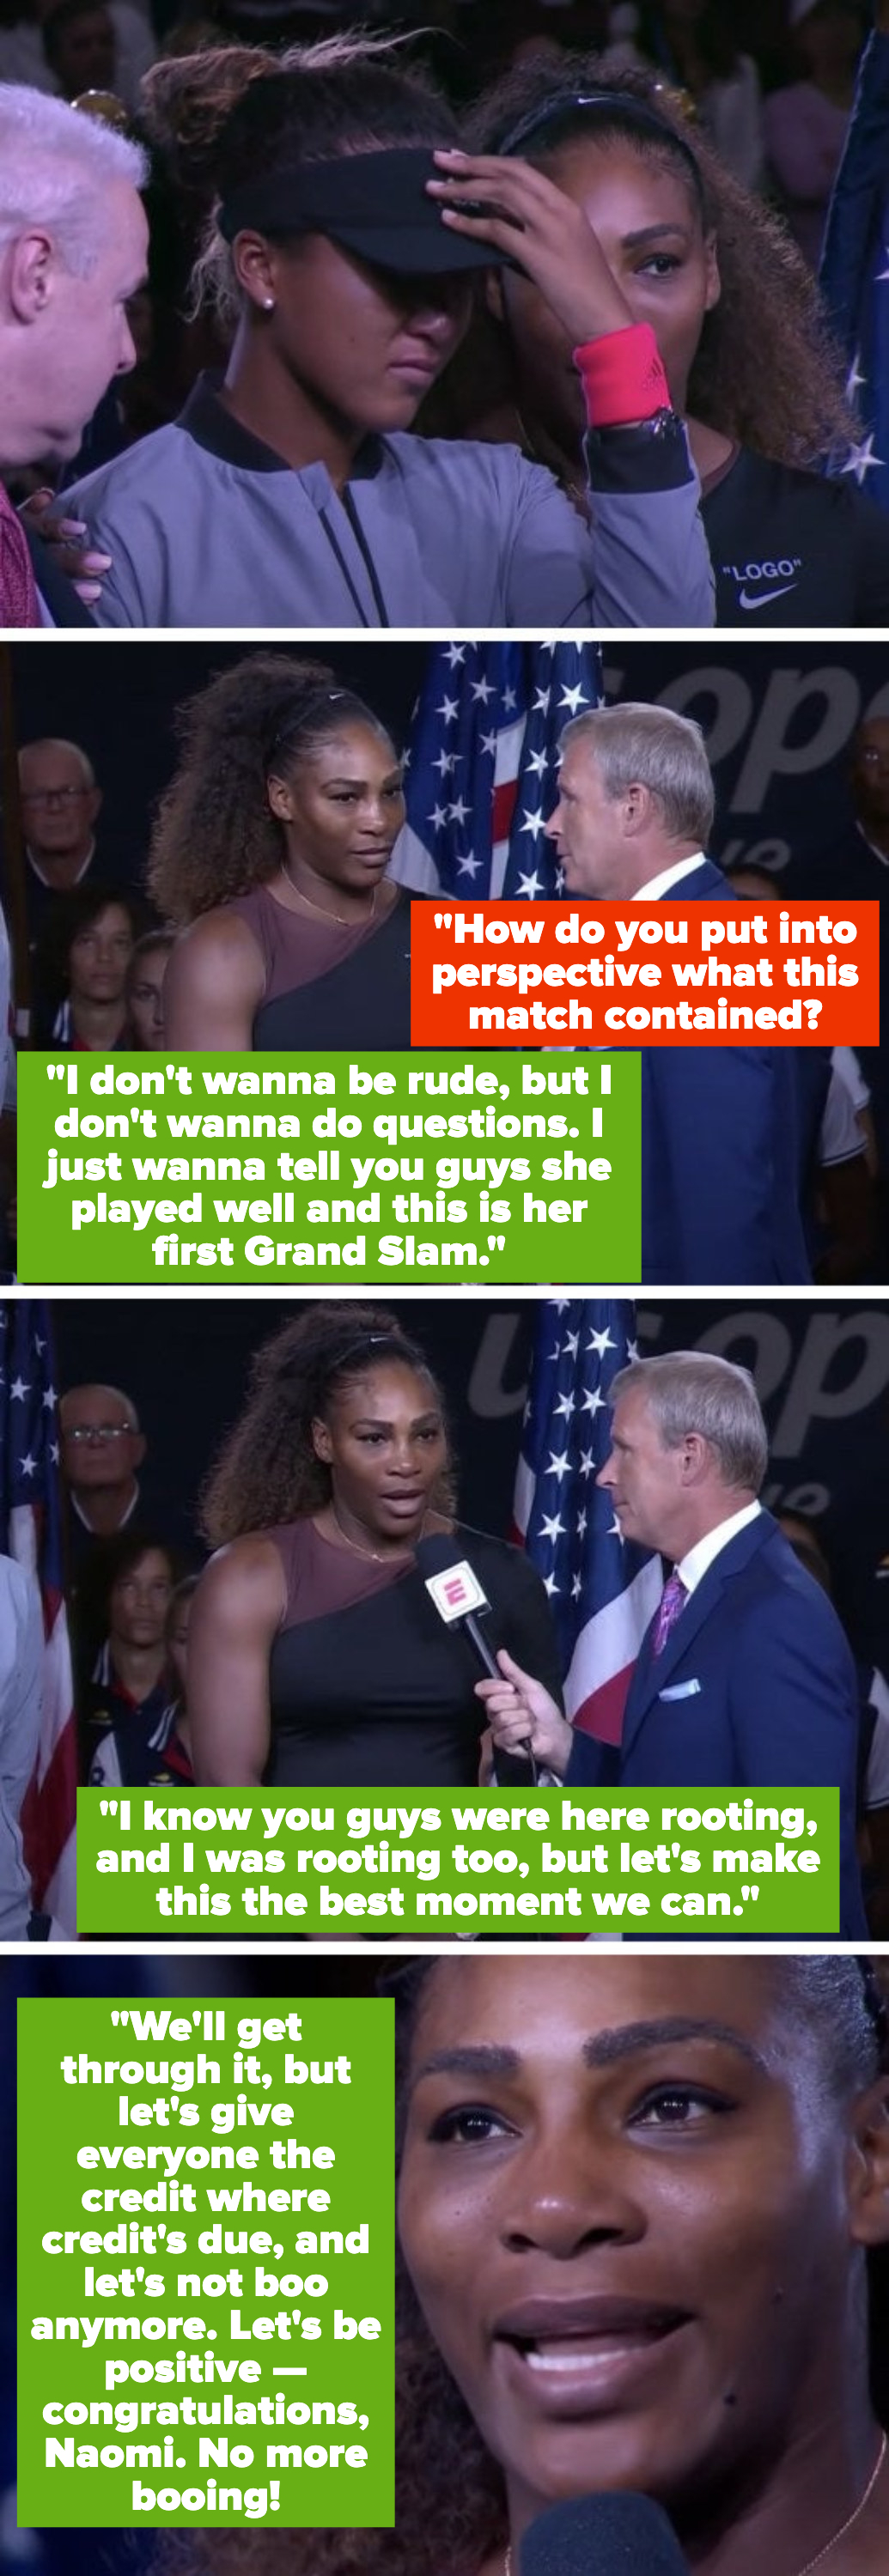 Williams to the crowd: &quot;Let&#x27;s give everyone the credit where credit&#x27;s due, and let&#x27;s not boo anymore. Let&#x27;s be positive — congratulations, Naomi. No more booing!&quot;